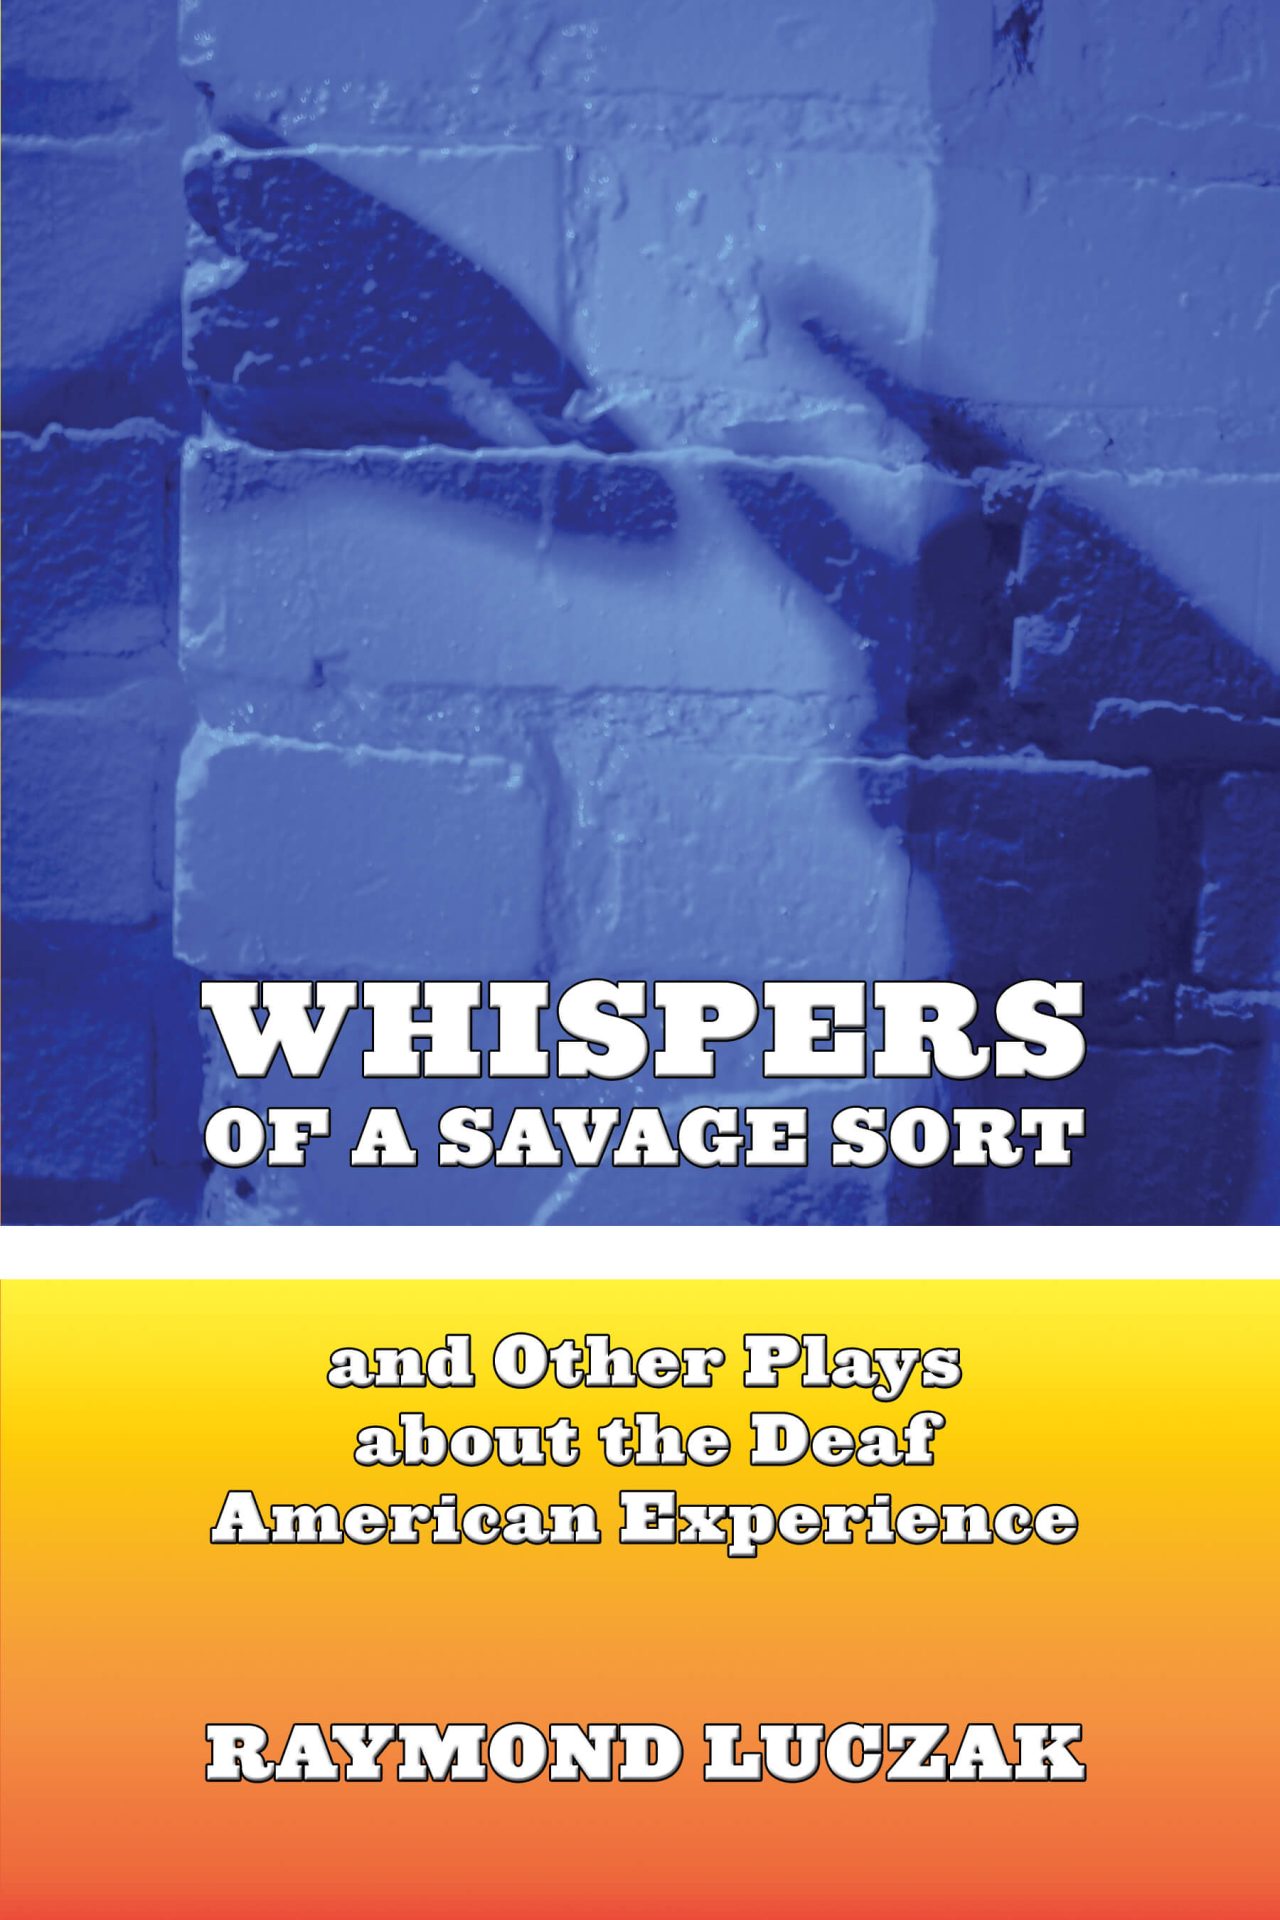 In the top half of the image is a blue tinted image of a pair of hands signing in shadow. The title in white shows WHISPERS OF A SAVAGE SORT. Below it is a thin white stripe. Below the stripe is a fiery gradient of yellow to orange showing the subtitle and author's name in white: and Other Plays about the Deaf American Experience | RAYMOND LUCZAK.